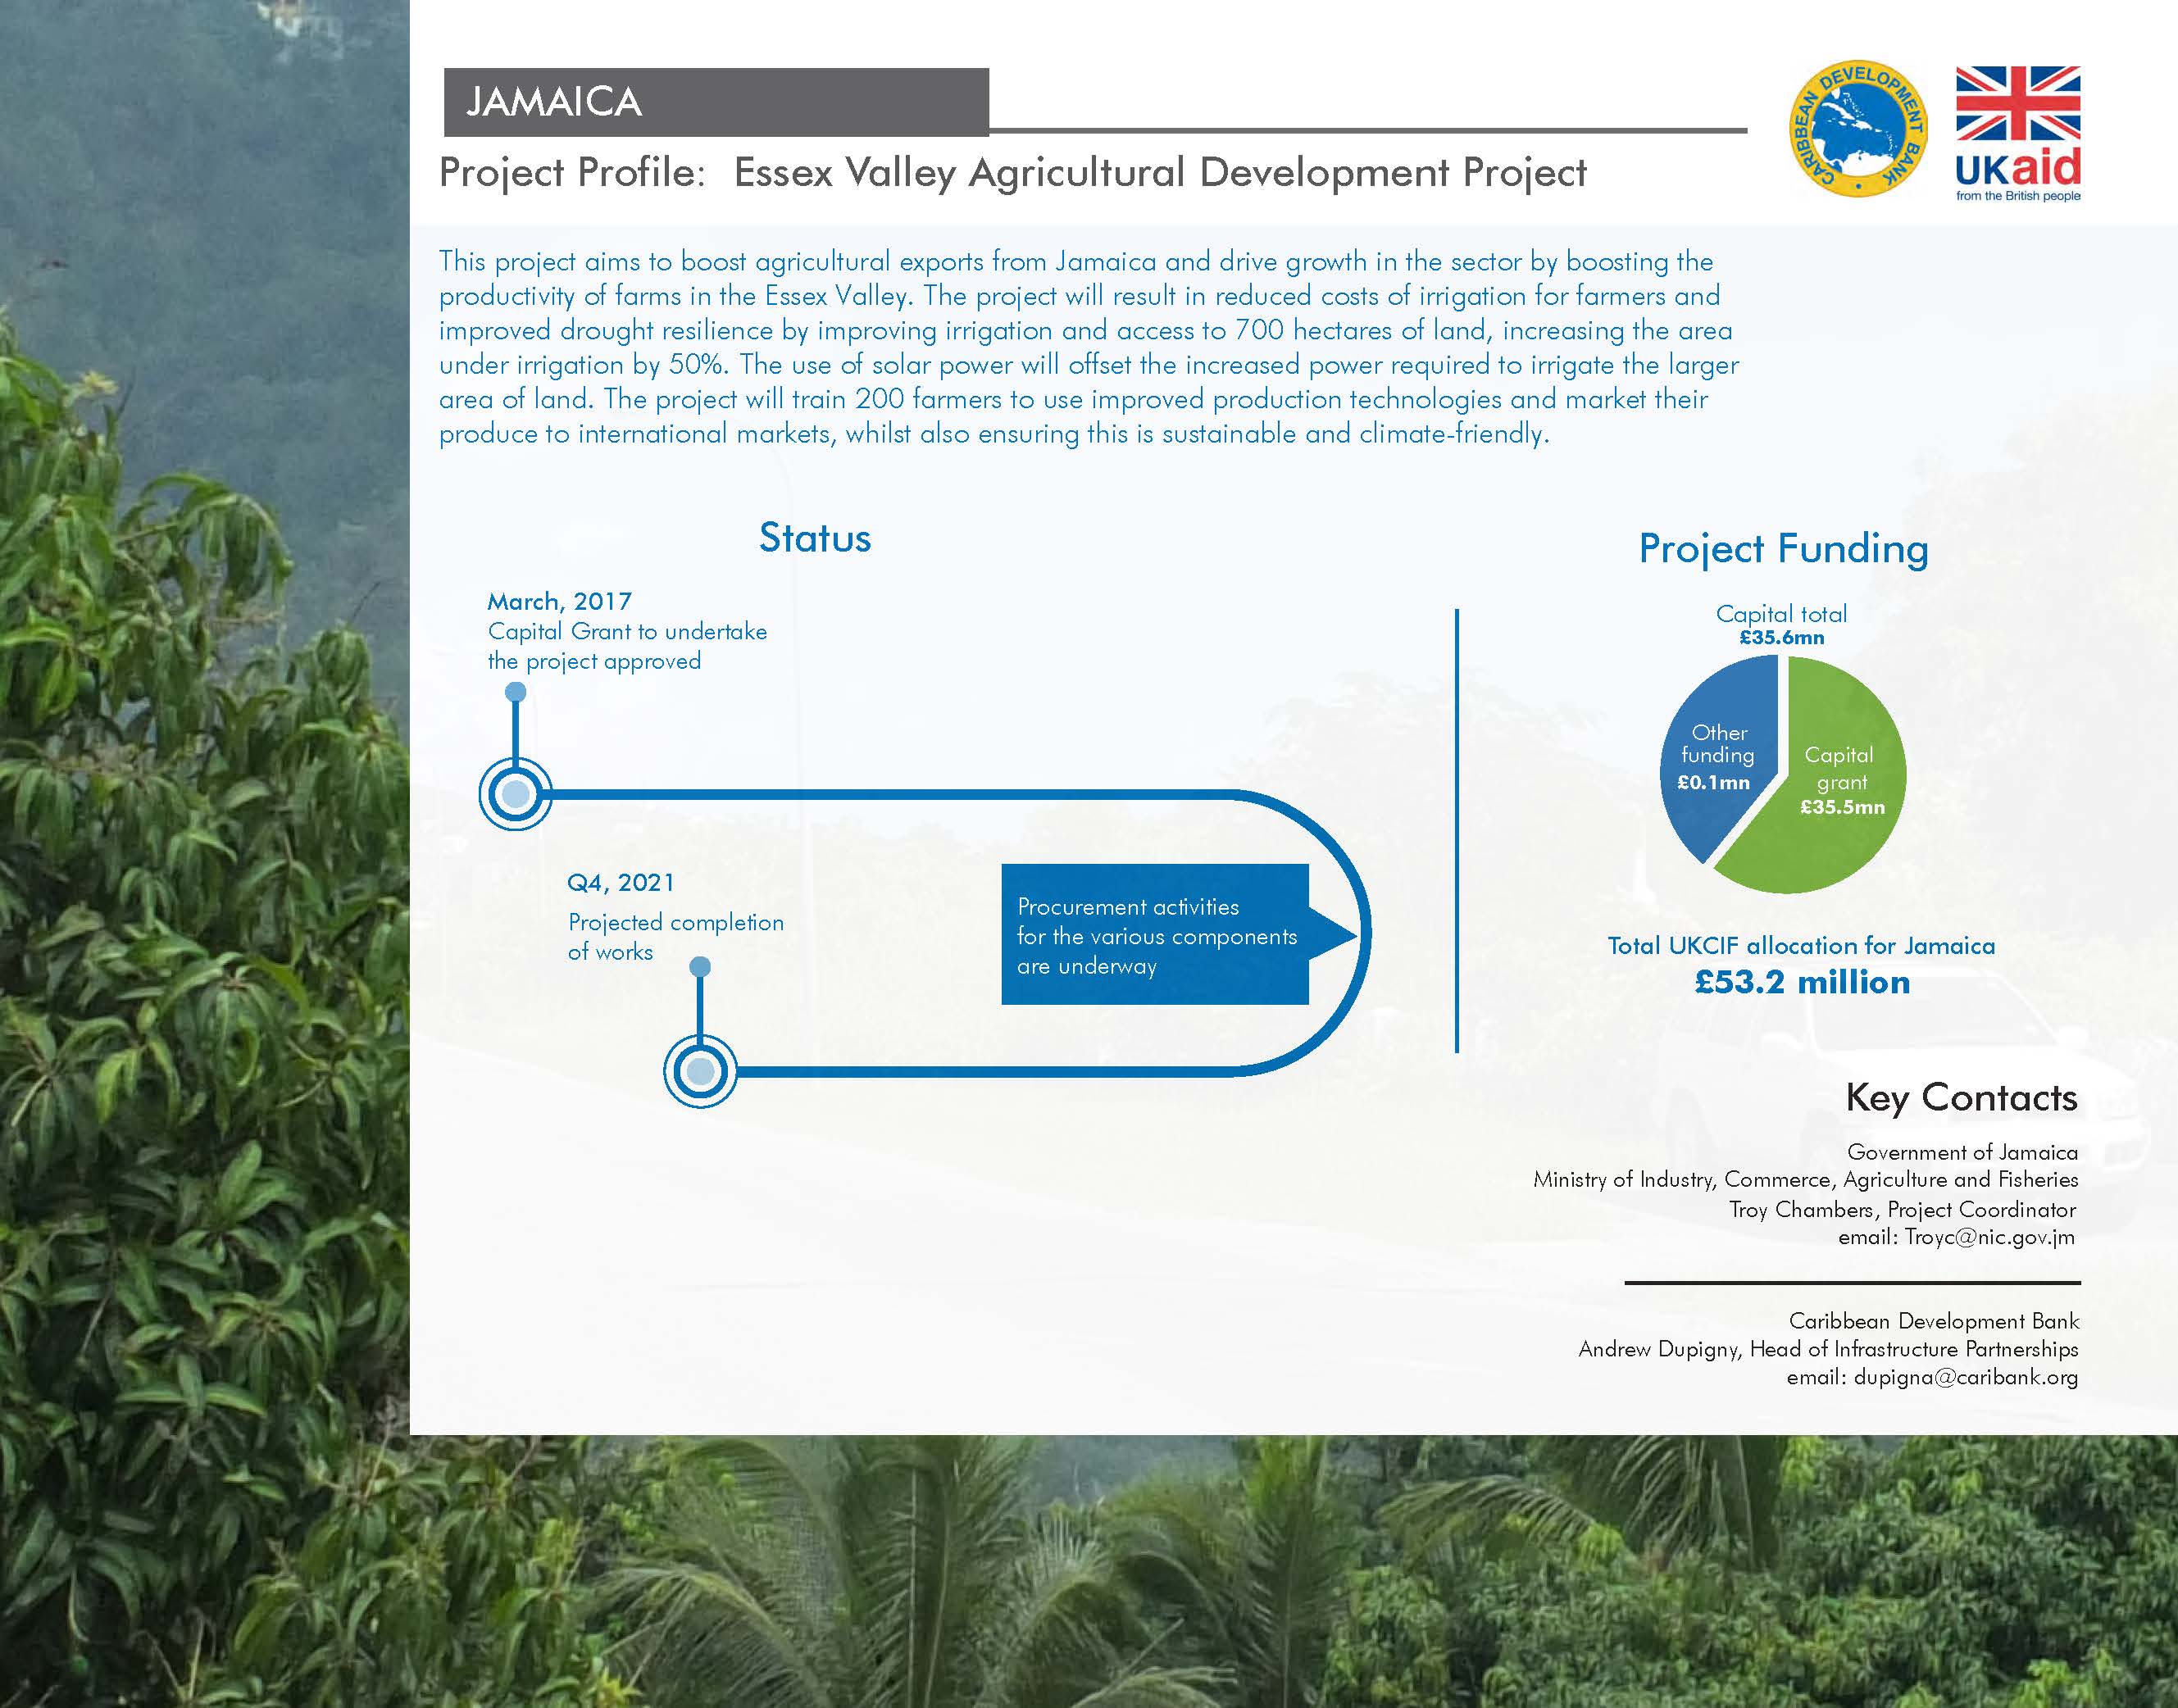 project profile with background image of green vegetation with text and charts against white backdrop